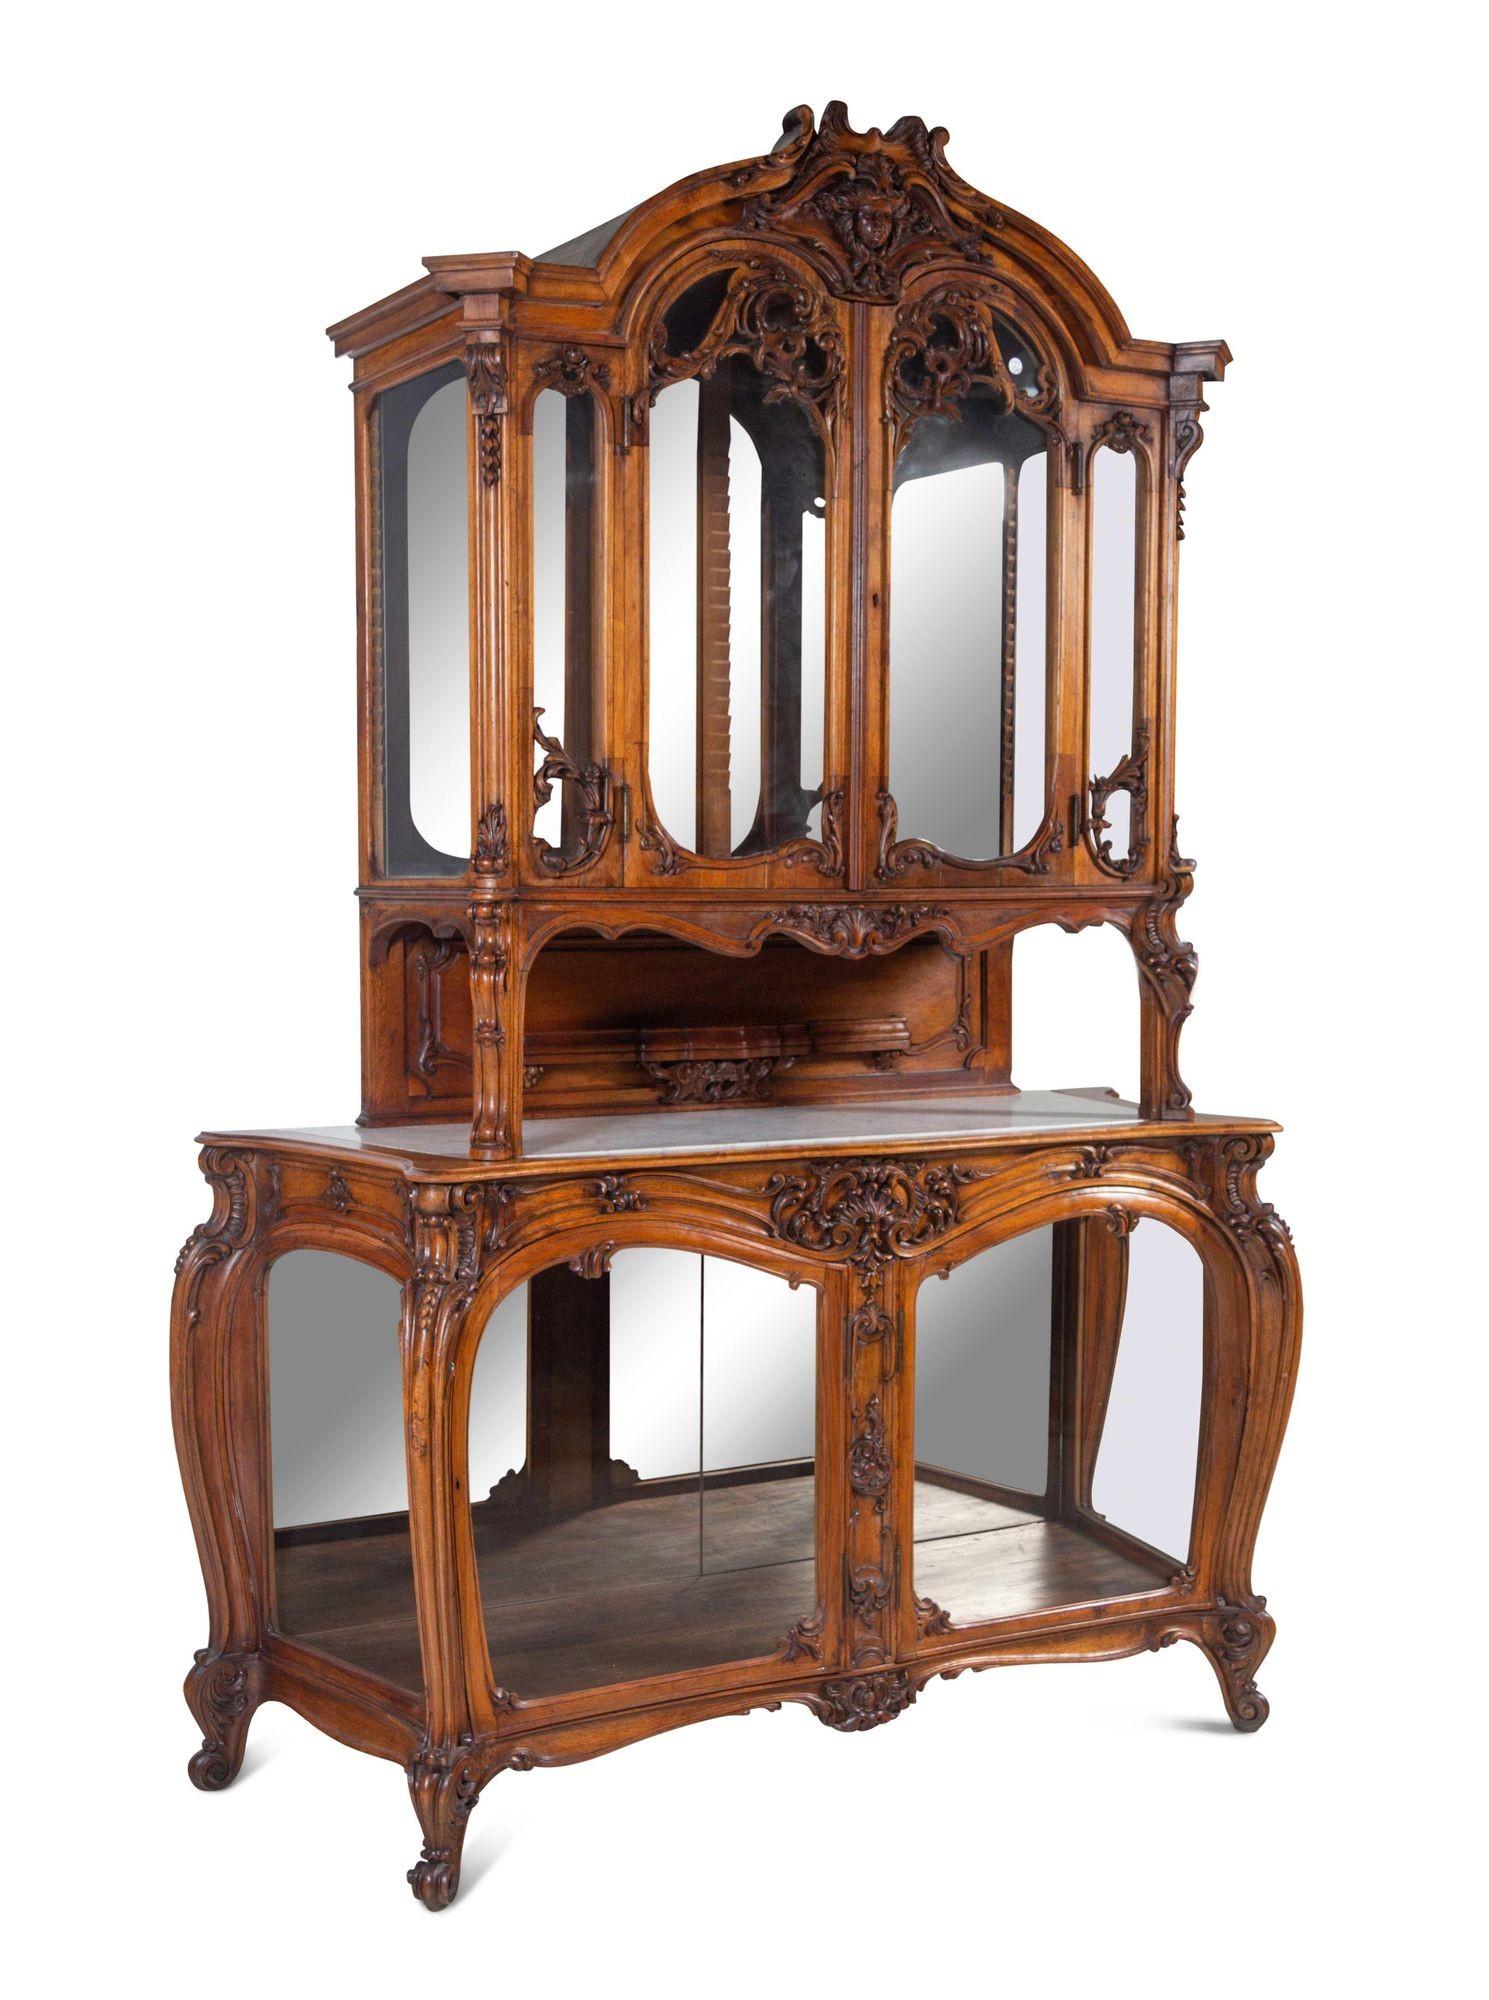 This exquisite Louis XV Style Buffet Deux Corps, made from rich walnut, features a mirrored back, adding a touch of sophistication and reflecting the beauty of the displayed objects. Its dual-cabinet design, with upper and lower compartments, allows